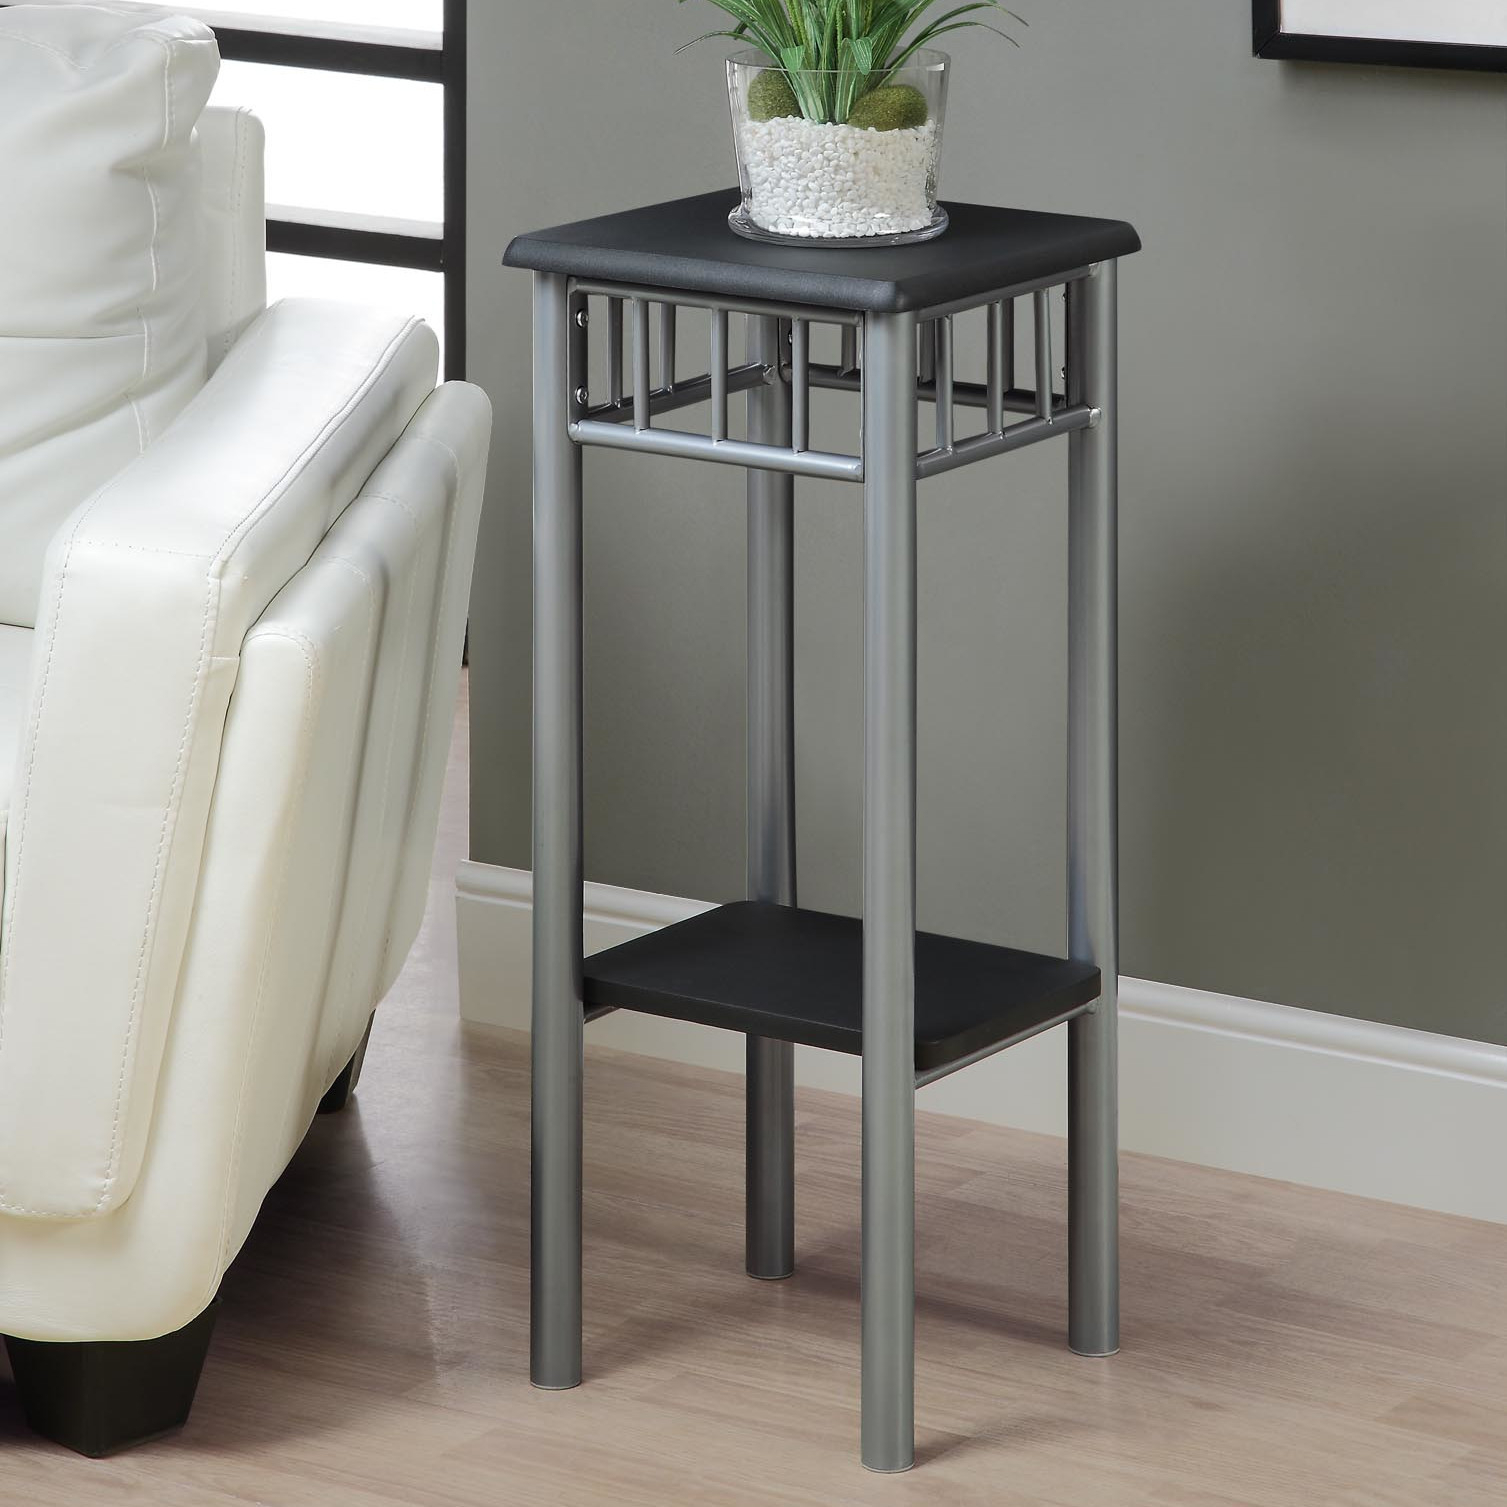 Multi-Tiered Plant Stand